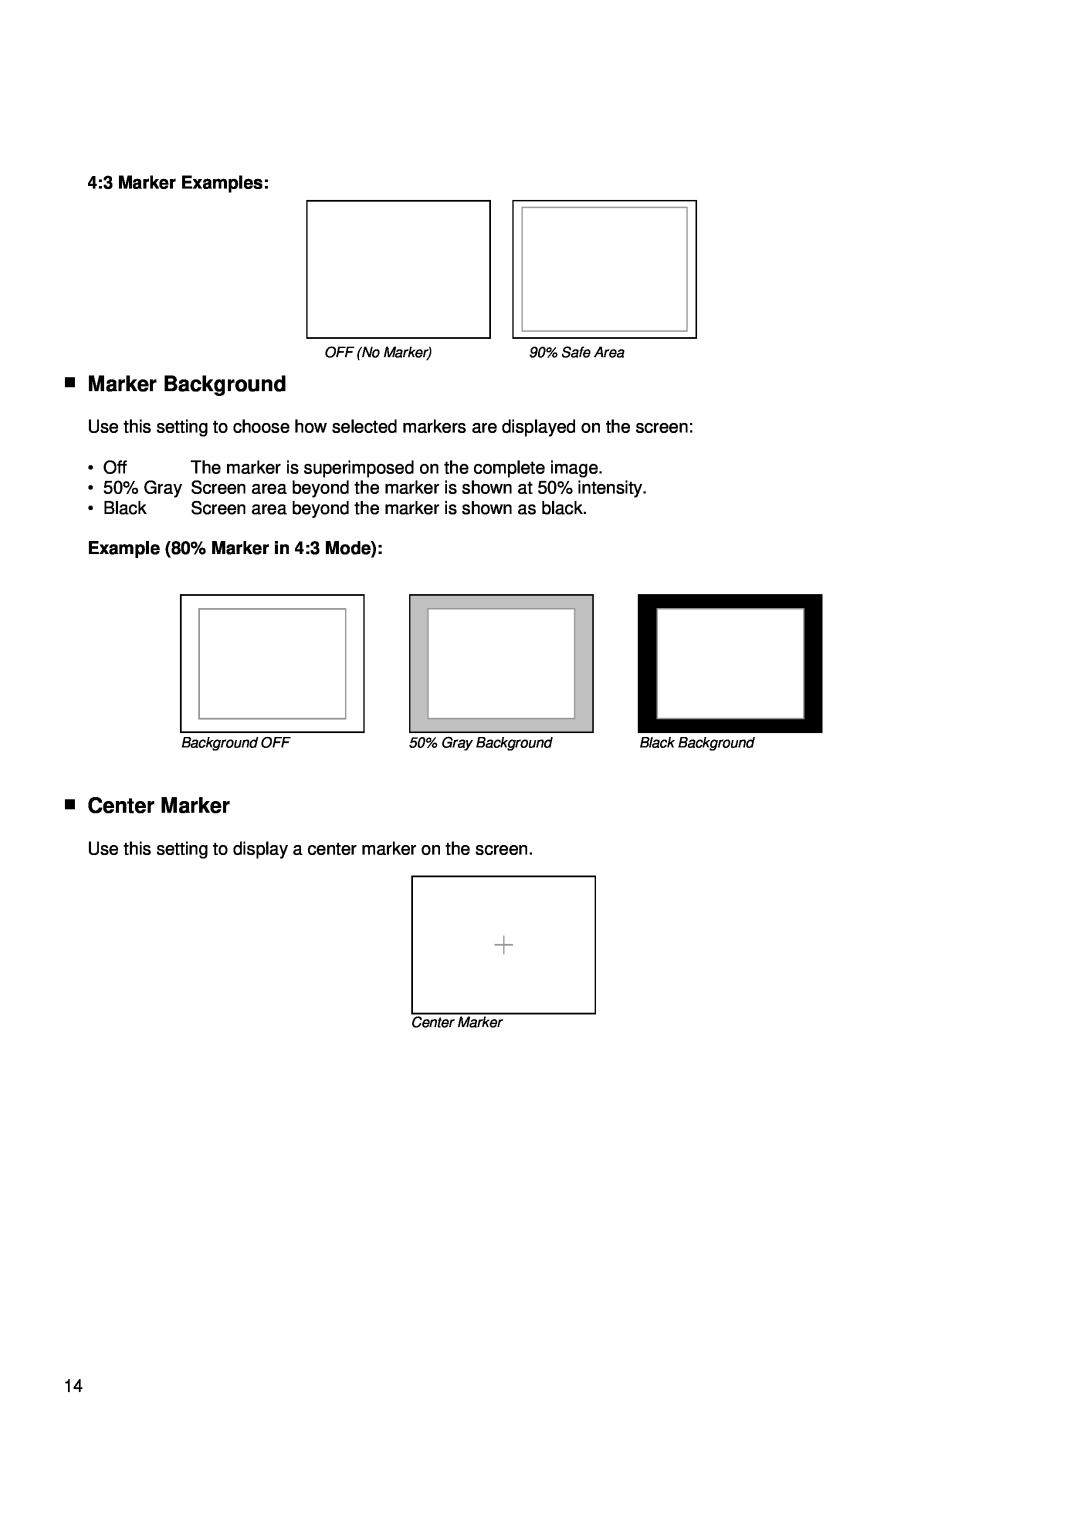 Marshall electronic V-R241-DLW manual Marker Background, Center Marker, Marker Examples, Example 80% Marker in 43 Mode 